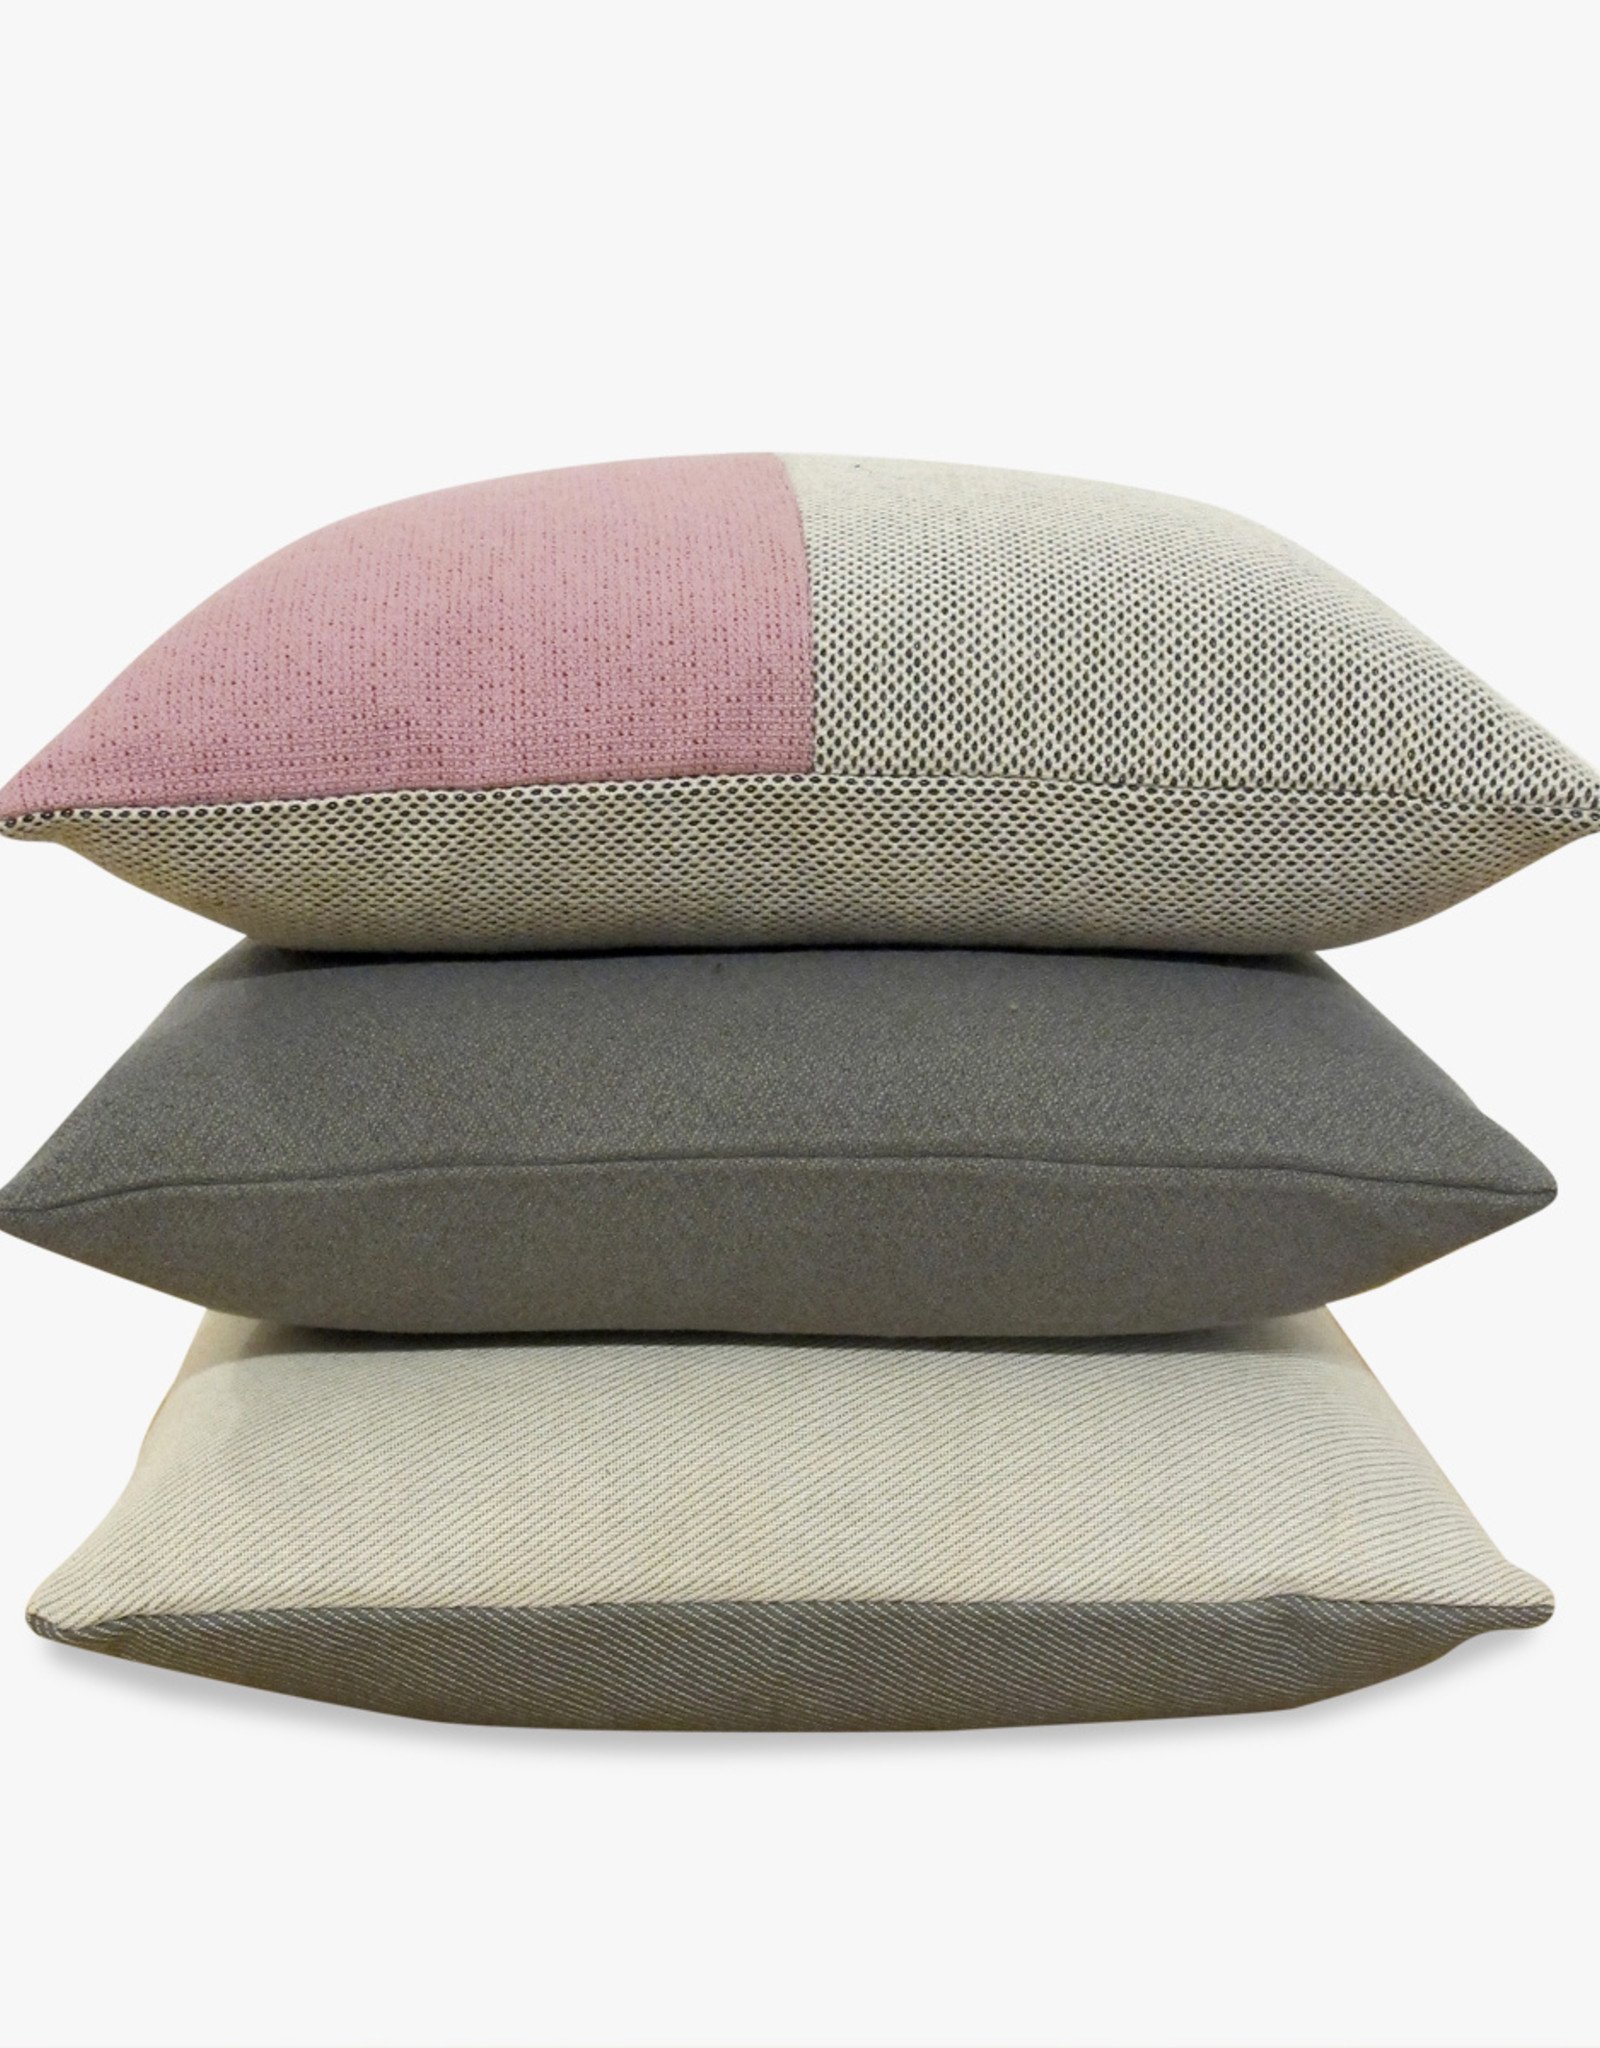 Cushion by Great Dane | Assorted fabric